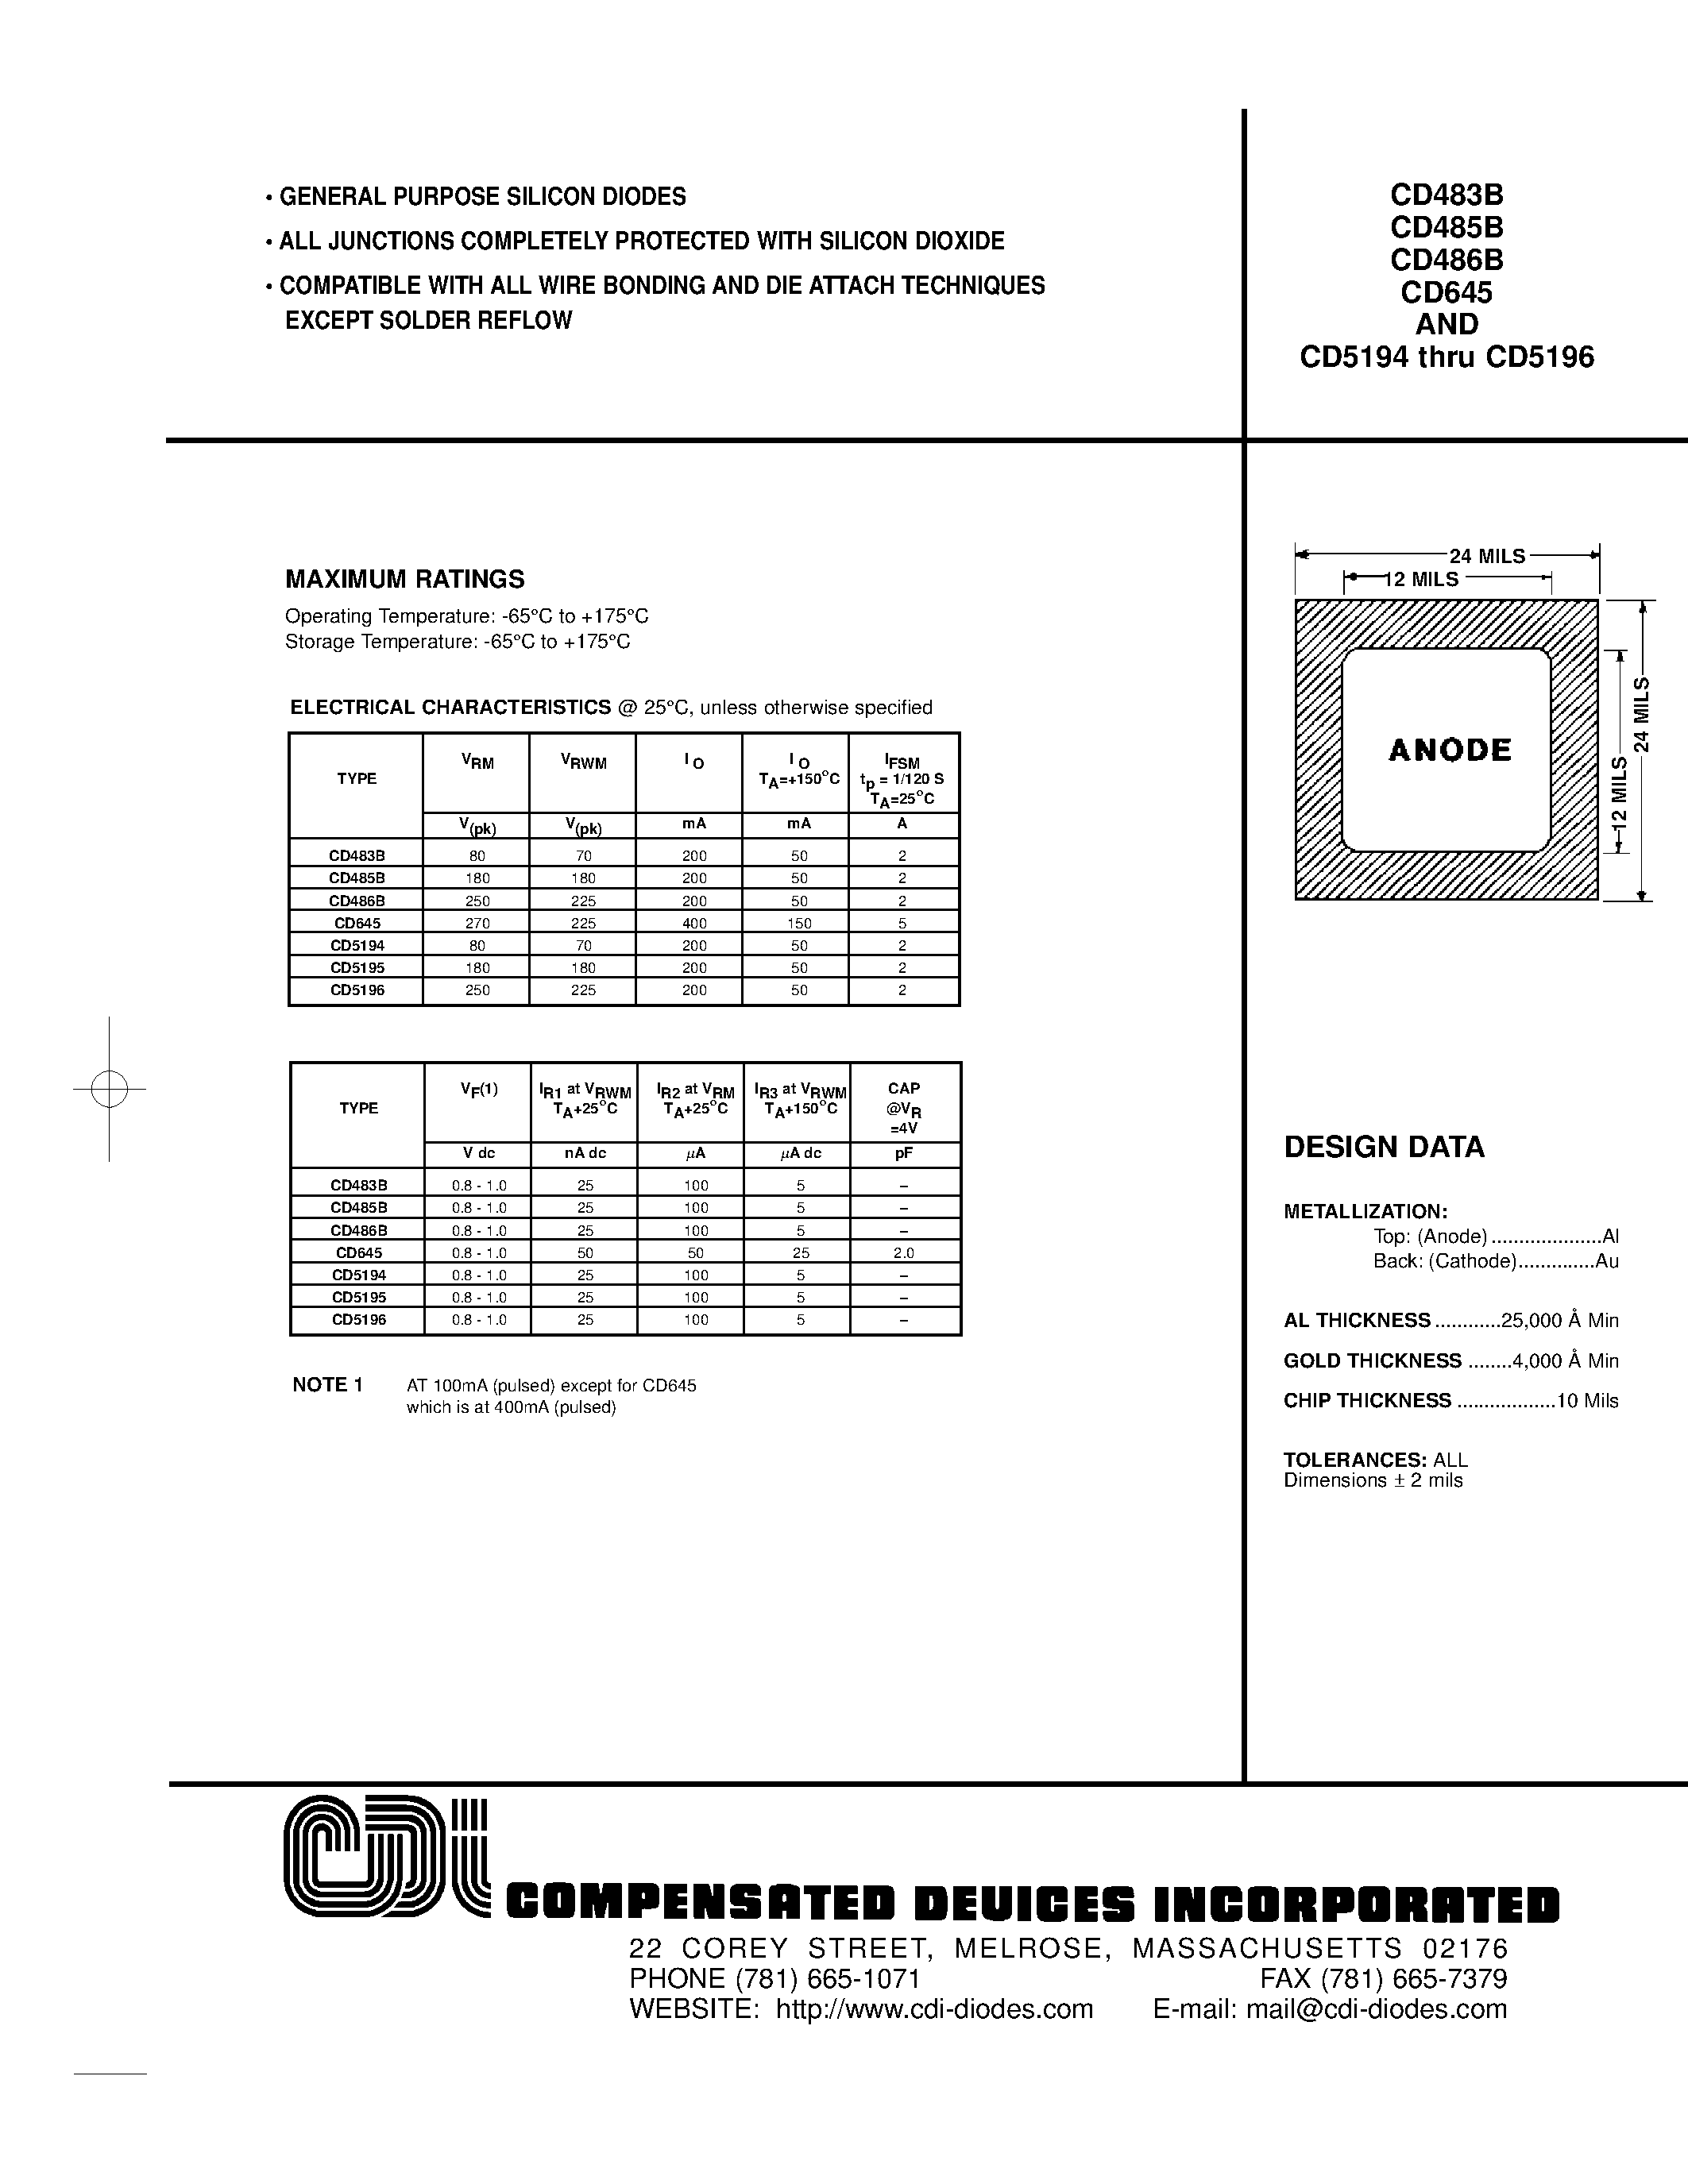 Даташит CD5195 - GENERAL PURPOSE SILICON DIODES страница 1